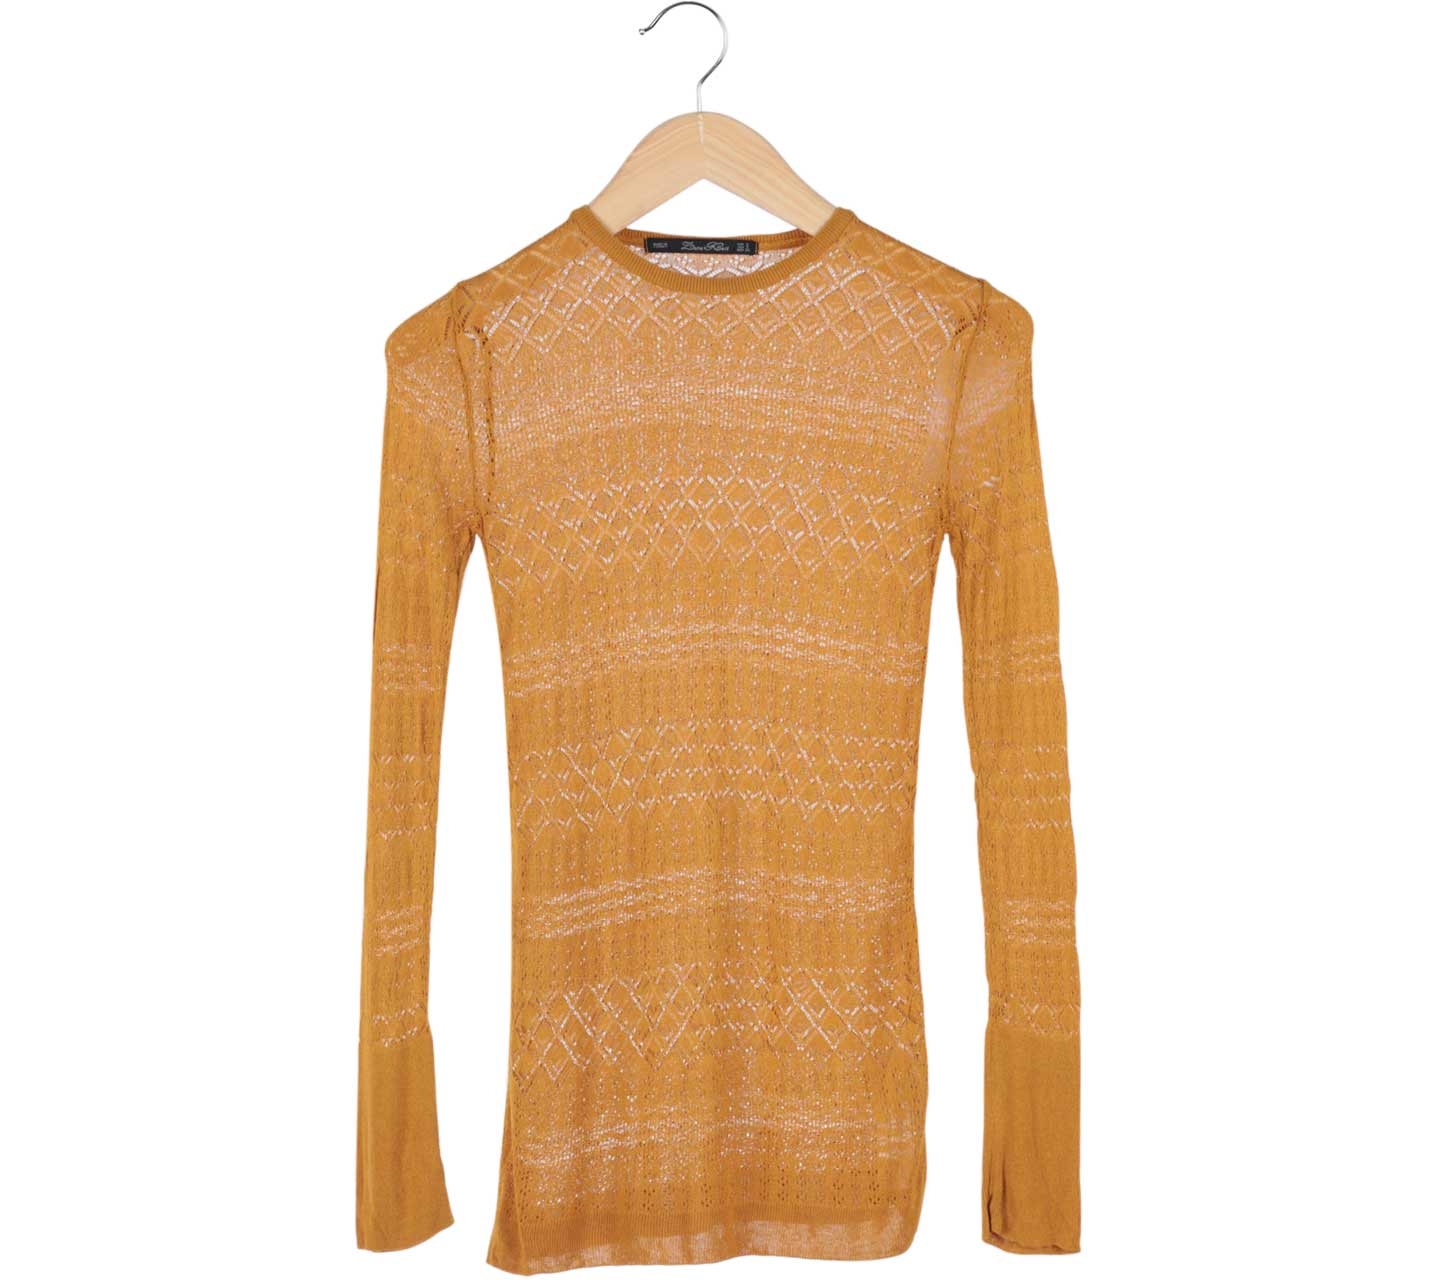 Zara Brown Knitted Blouse